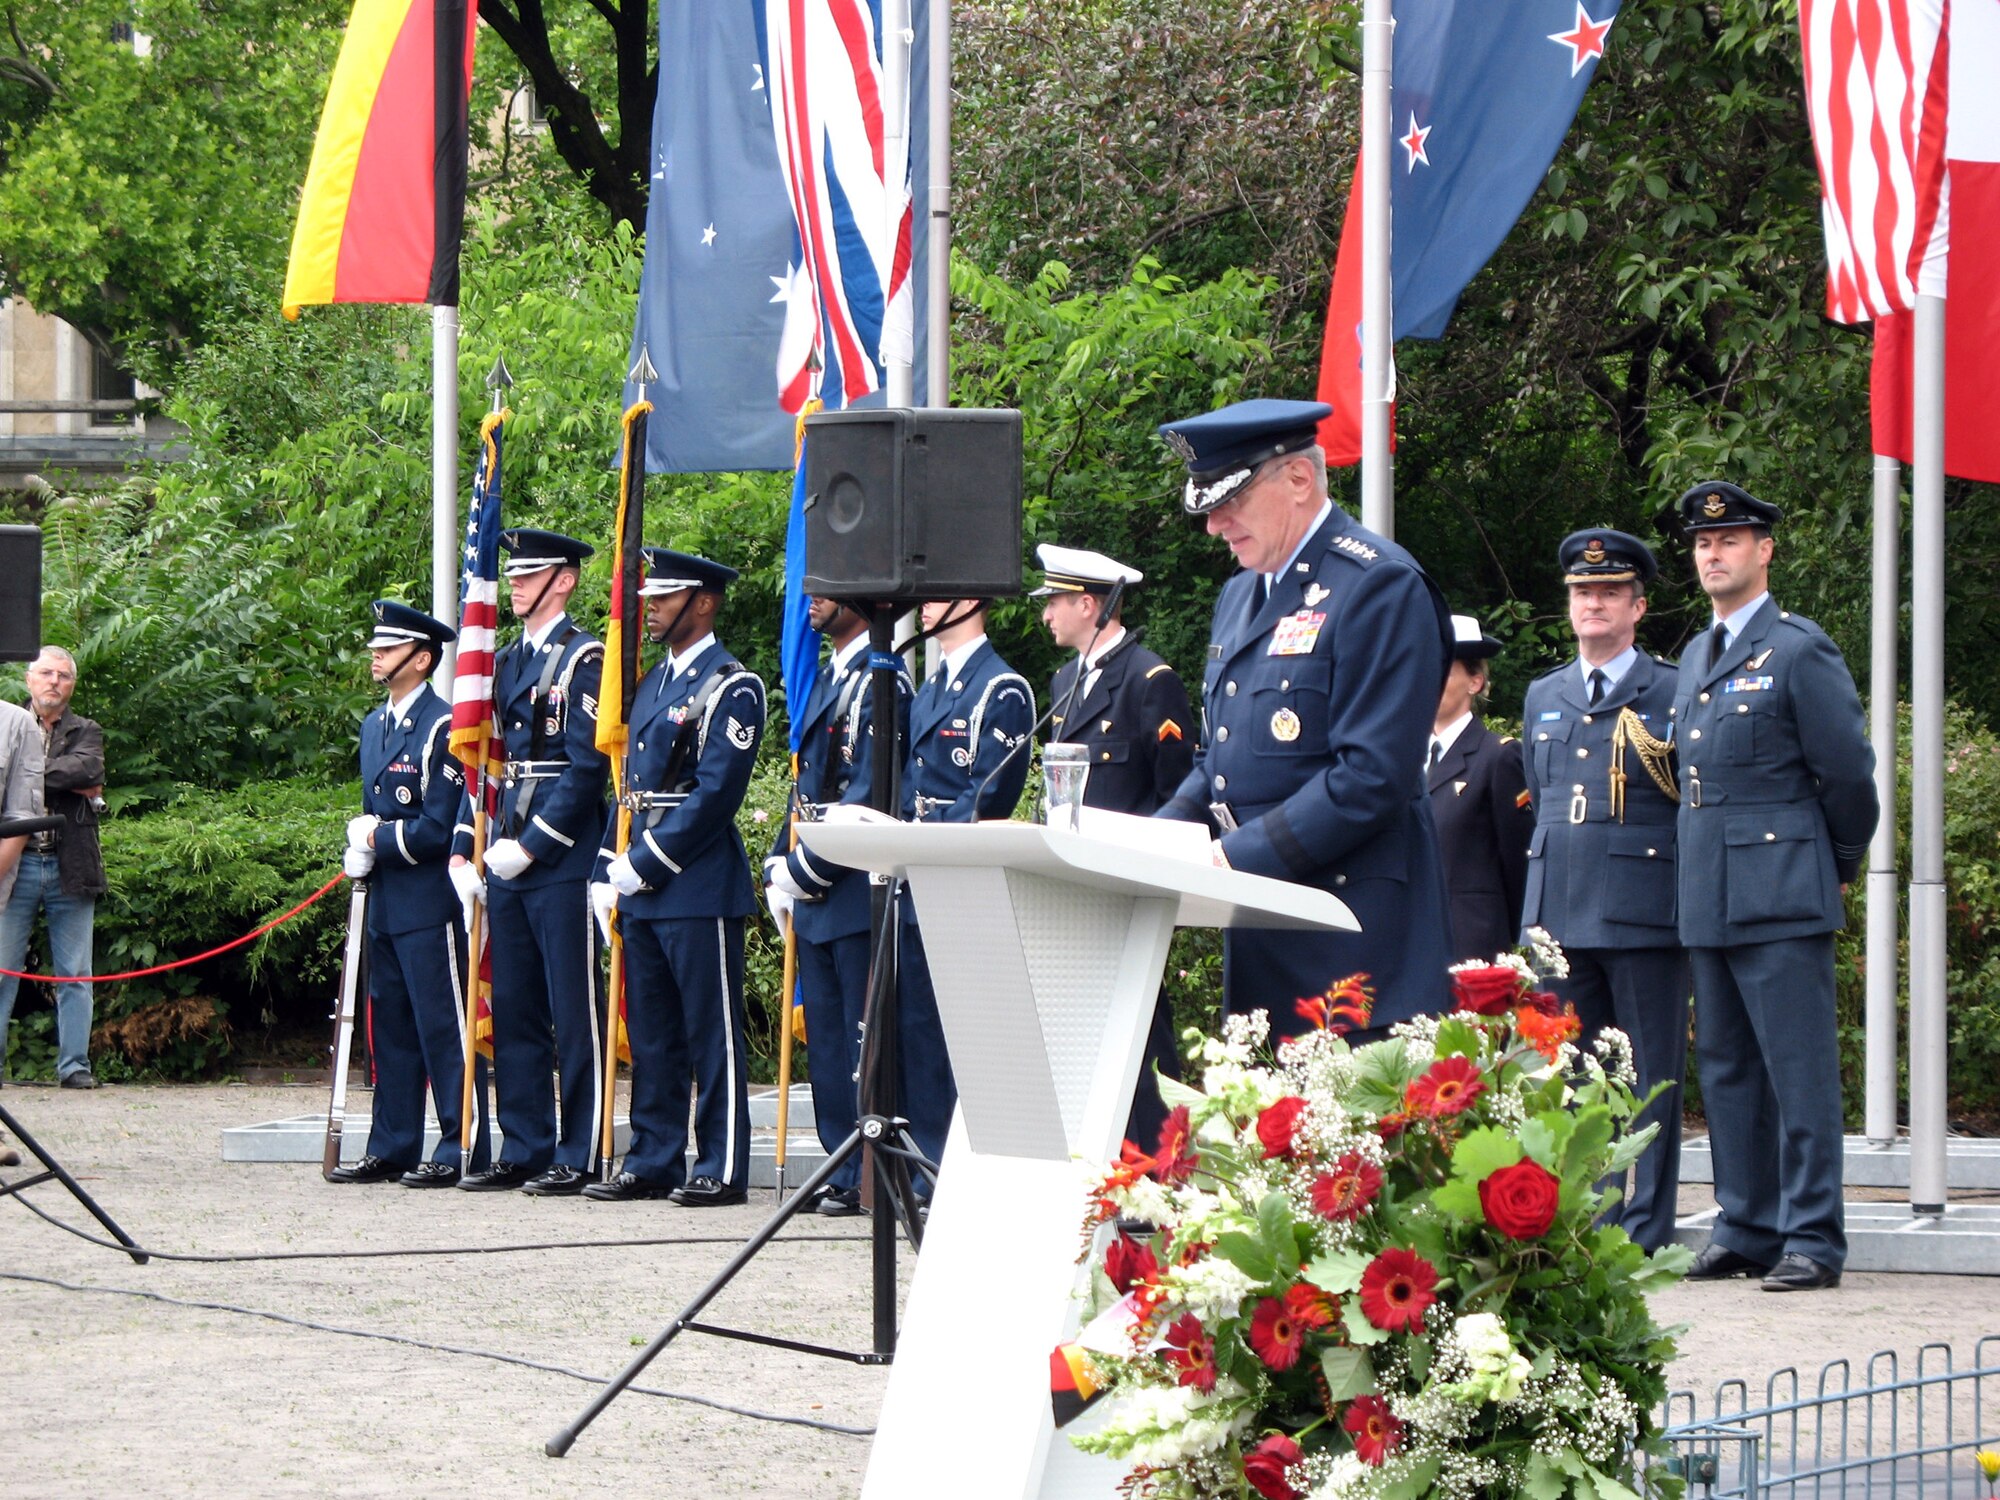 Gen. Roger A. Brady speaks to a Berlin Airlift Memorial crowd at a 60th anniversary ceremony June 27 in Berlin. Sixty years ago, American Airmen teamed with French and British air forces to sustain the city for 11 months, flying food, coal, supplies and medicine to millions of Berliners cut off by the Soviet blockade of the city. General Brady is the U.S. Air Forces in Europe commander. (U.S. Air Force photo/Master Sgt. Ron Przysucha) 
